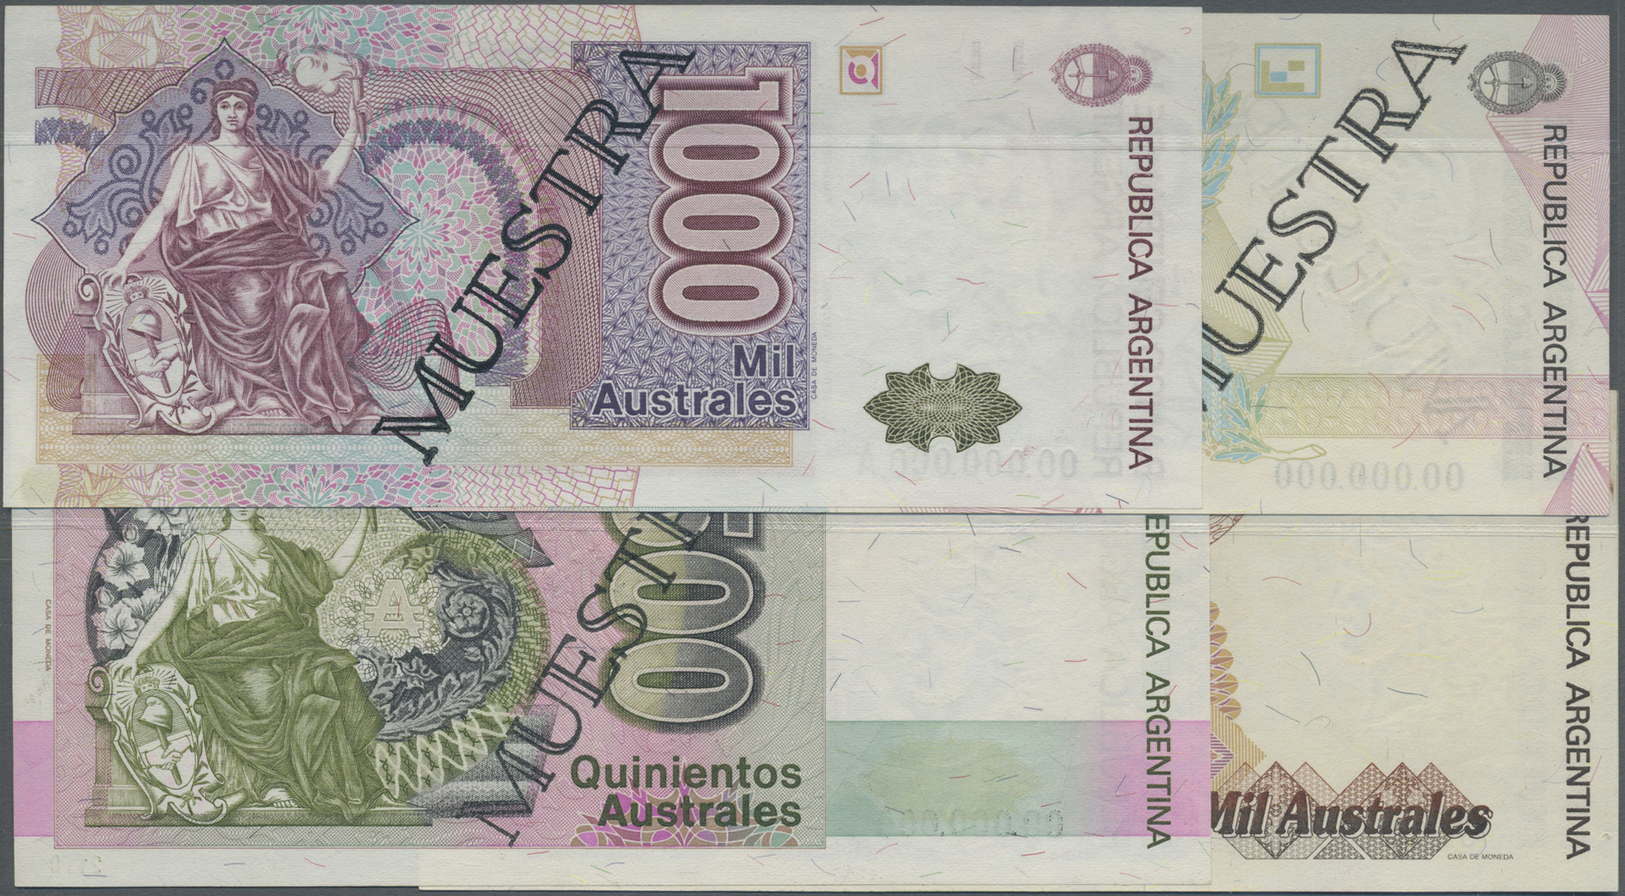 00044 Argentina / Argentinien: Set Of 8 Specimen Banknotes From 5 To 500.000 Australes P. 324s-329s, 337s, 338s, The 338 - Argentina